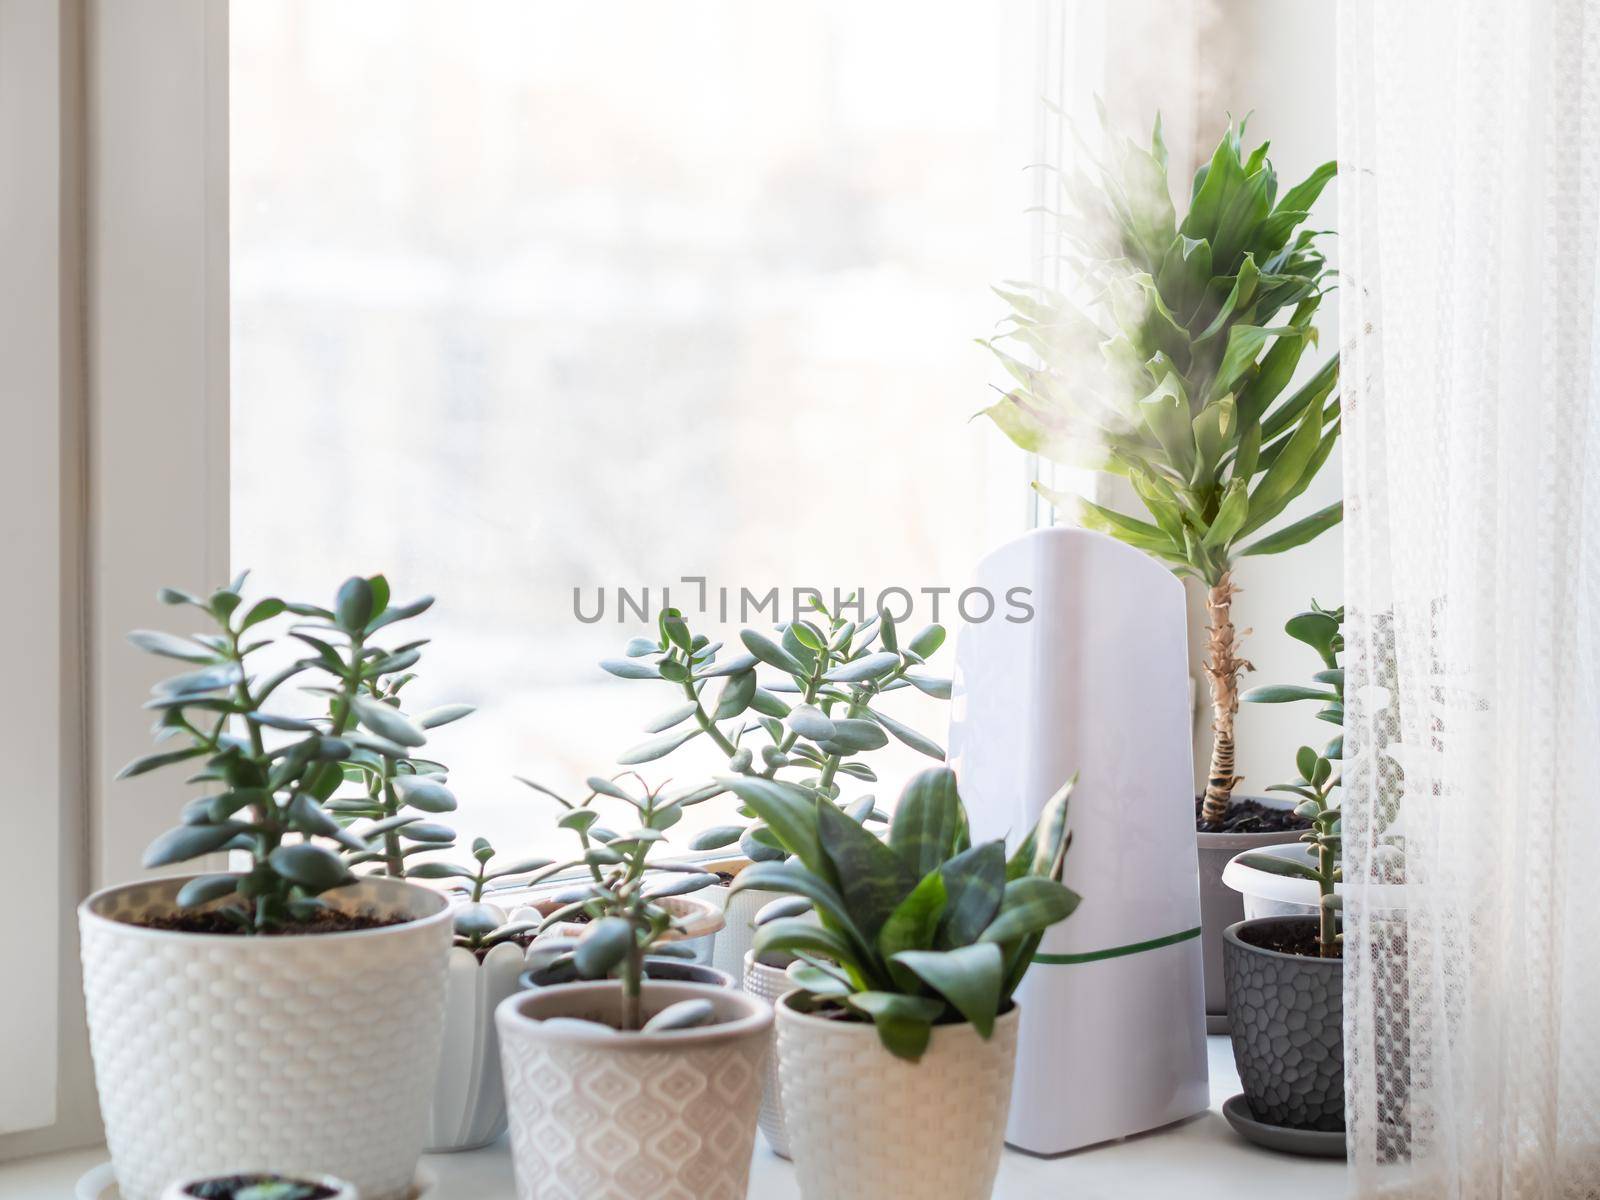 Ultrasonic humidifier among houseplants. Flower pots with succulent plants on windowsill. Water steam moisturizes dry air at home. Electric device for comfort atmosphere in living room.